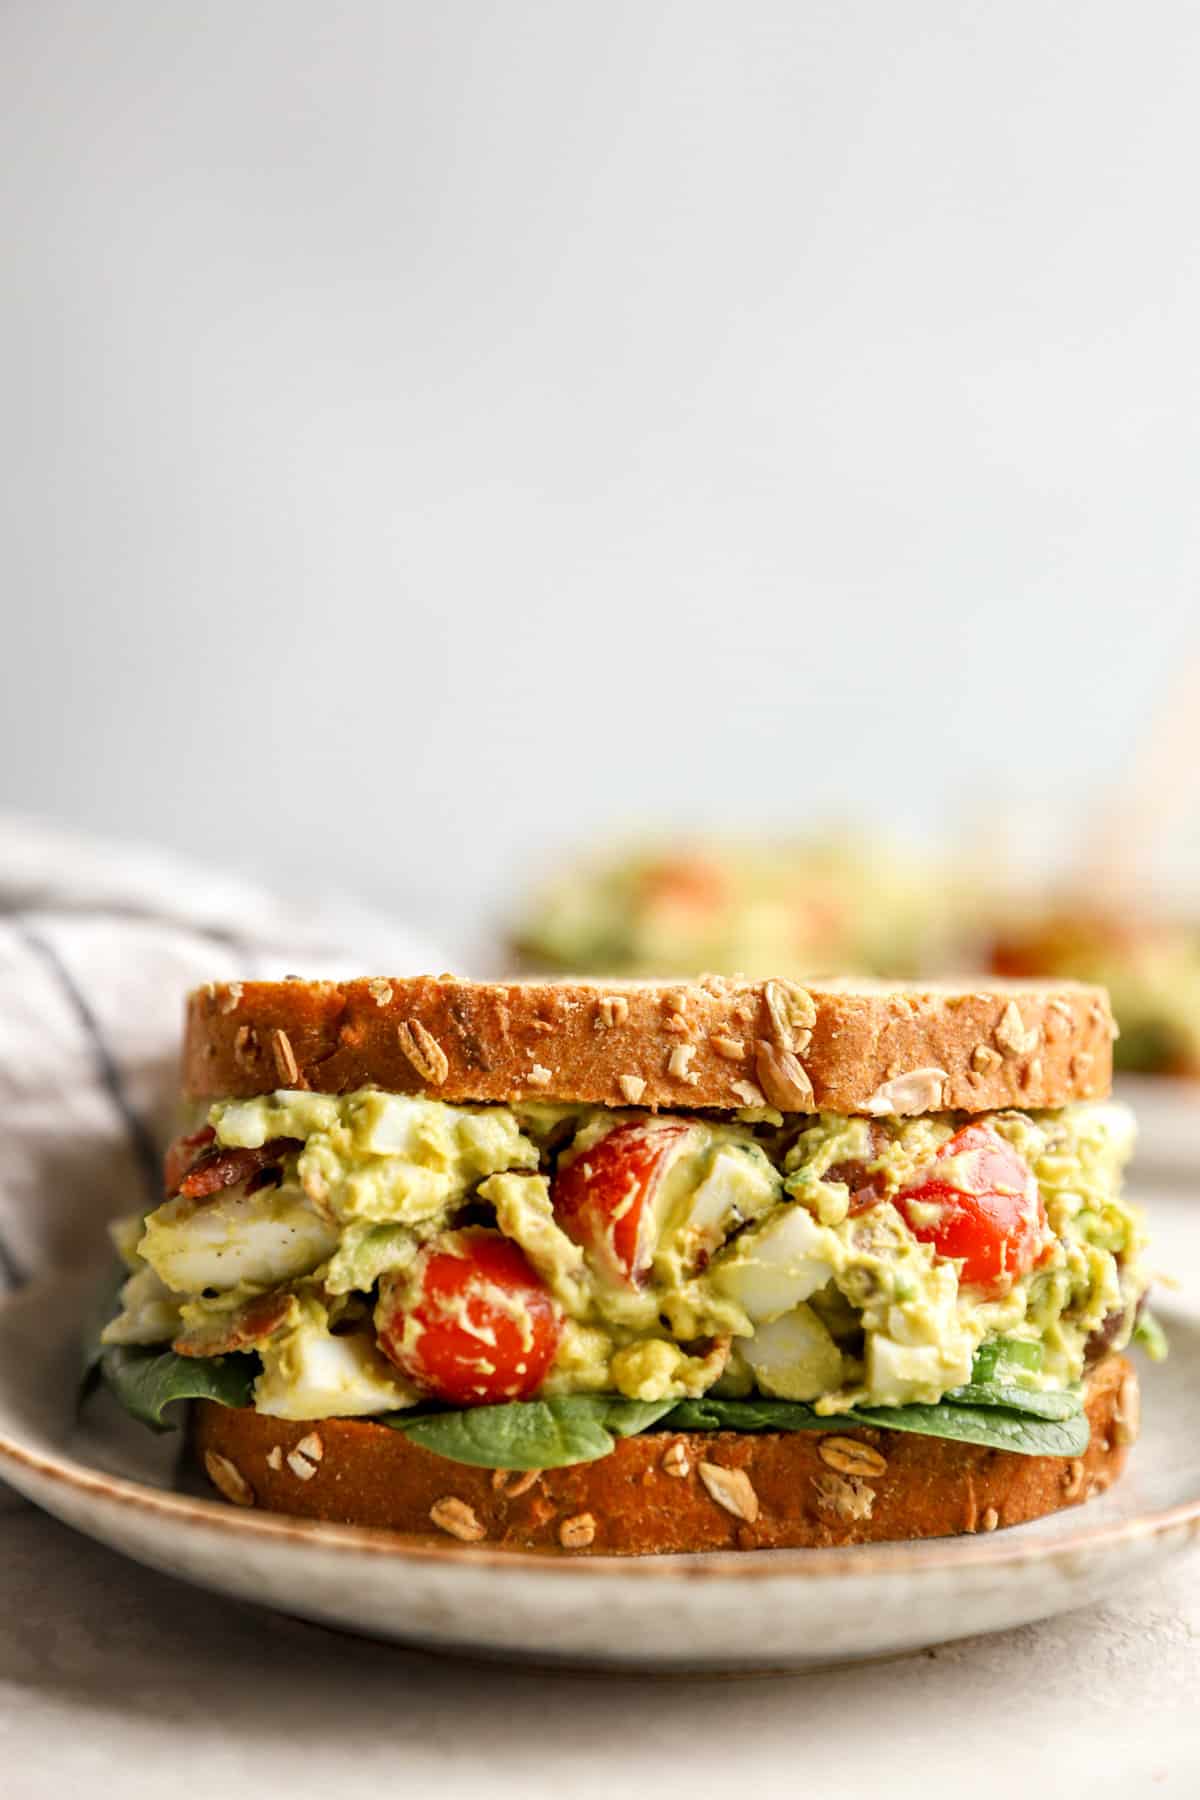 Side view of egg salad sandwich.